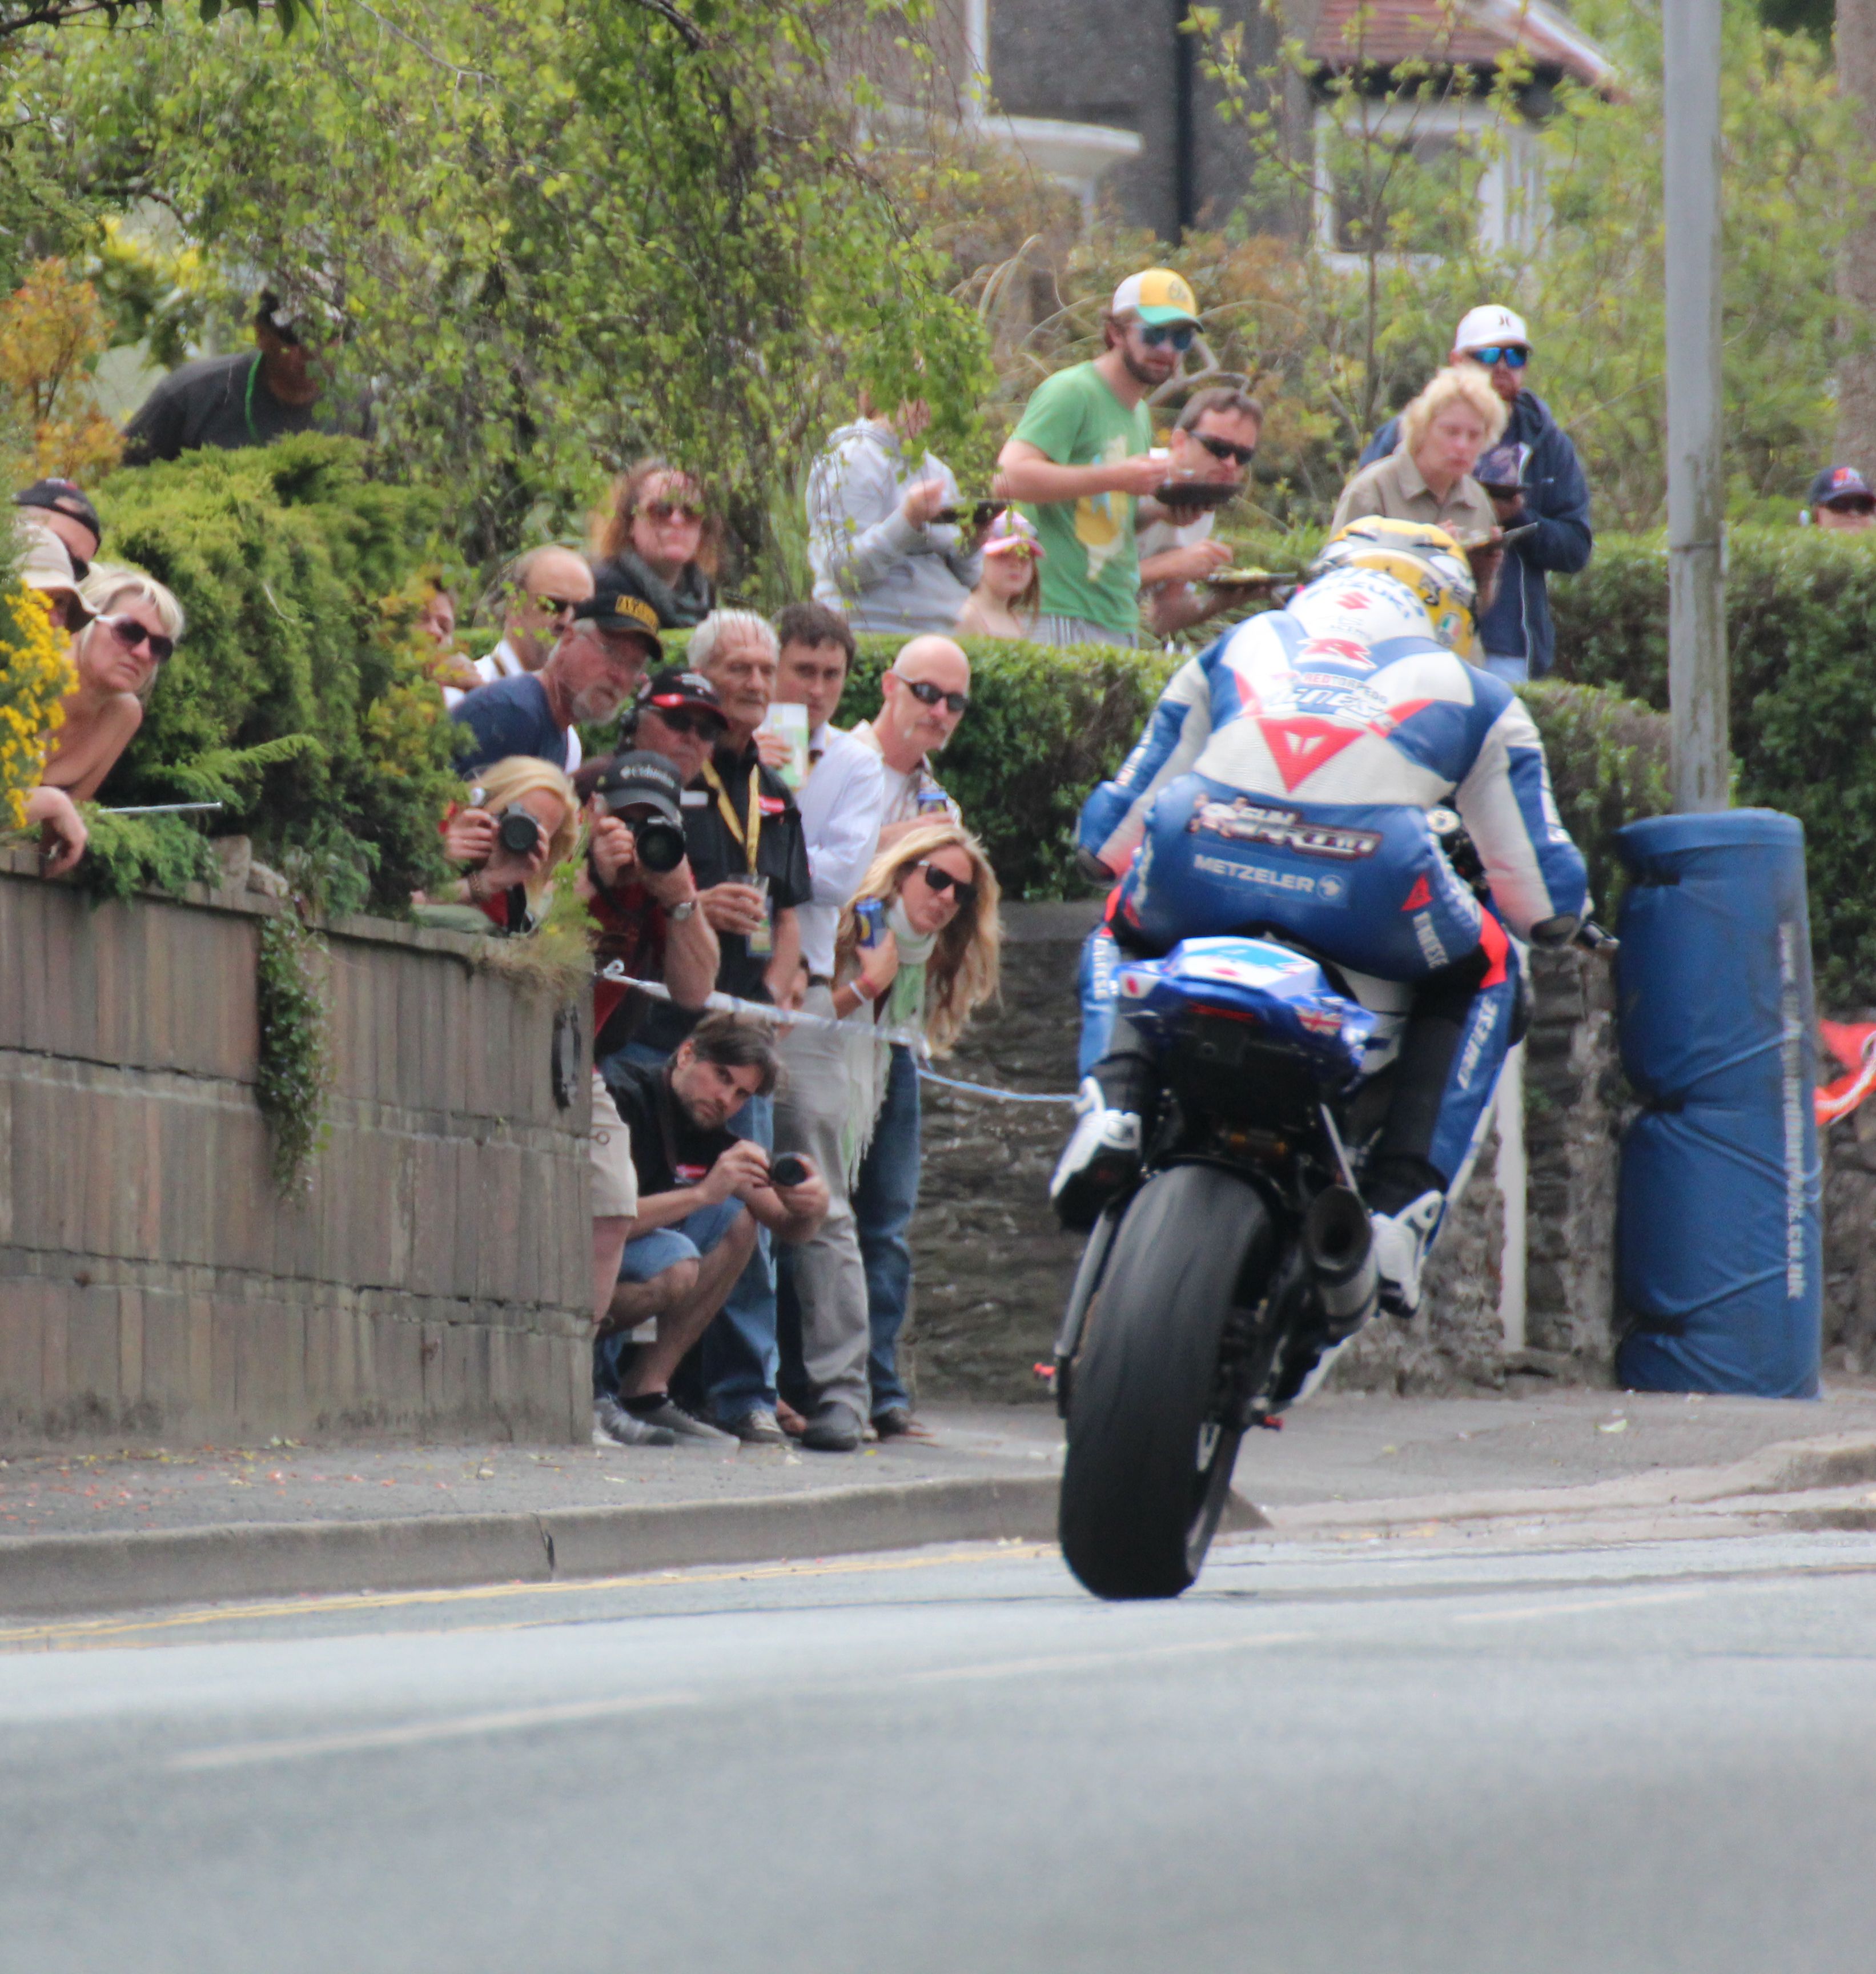 Watching the Isle of Man TT from a hedge!